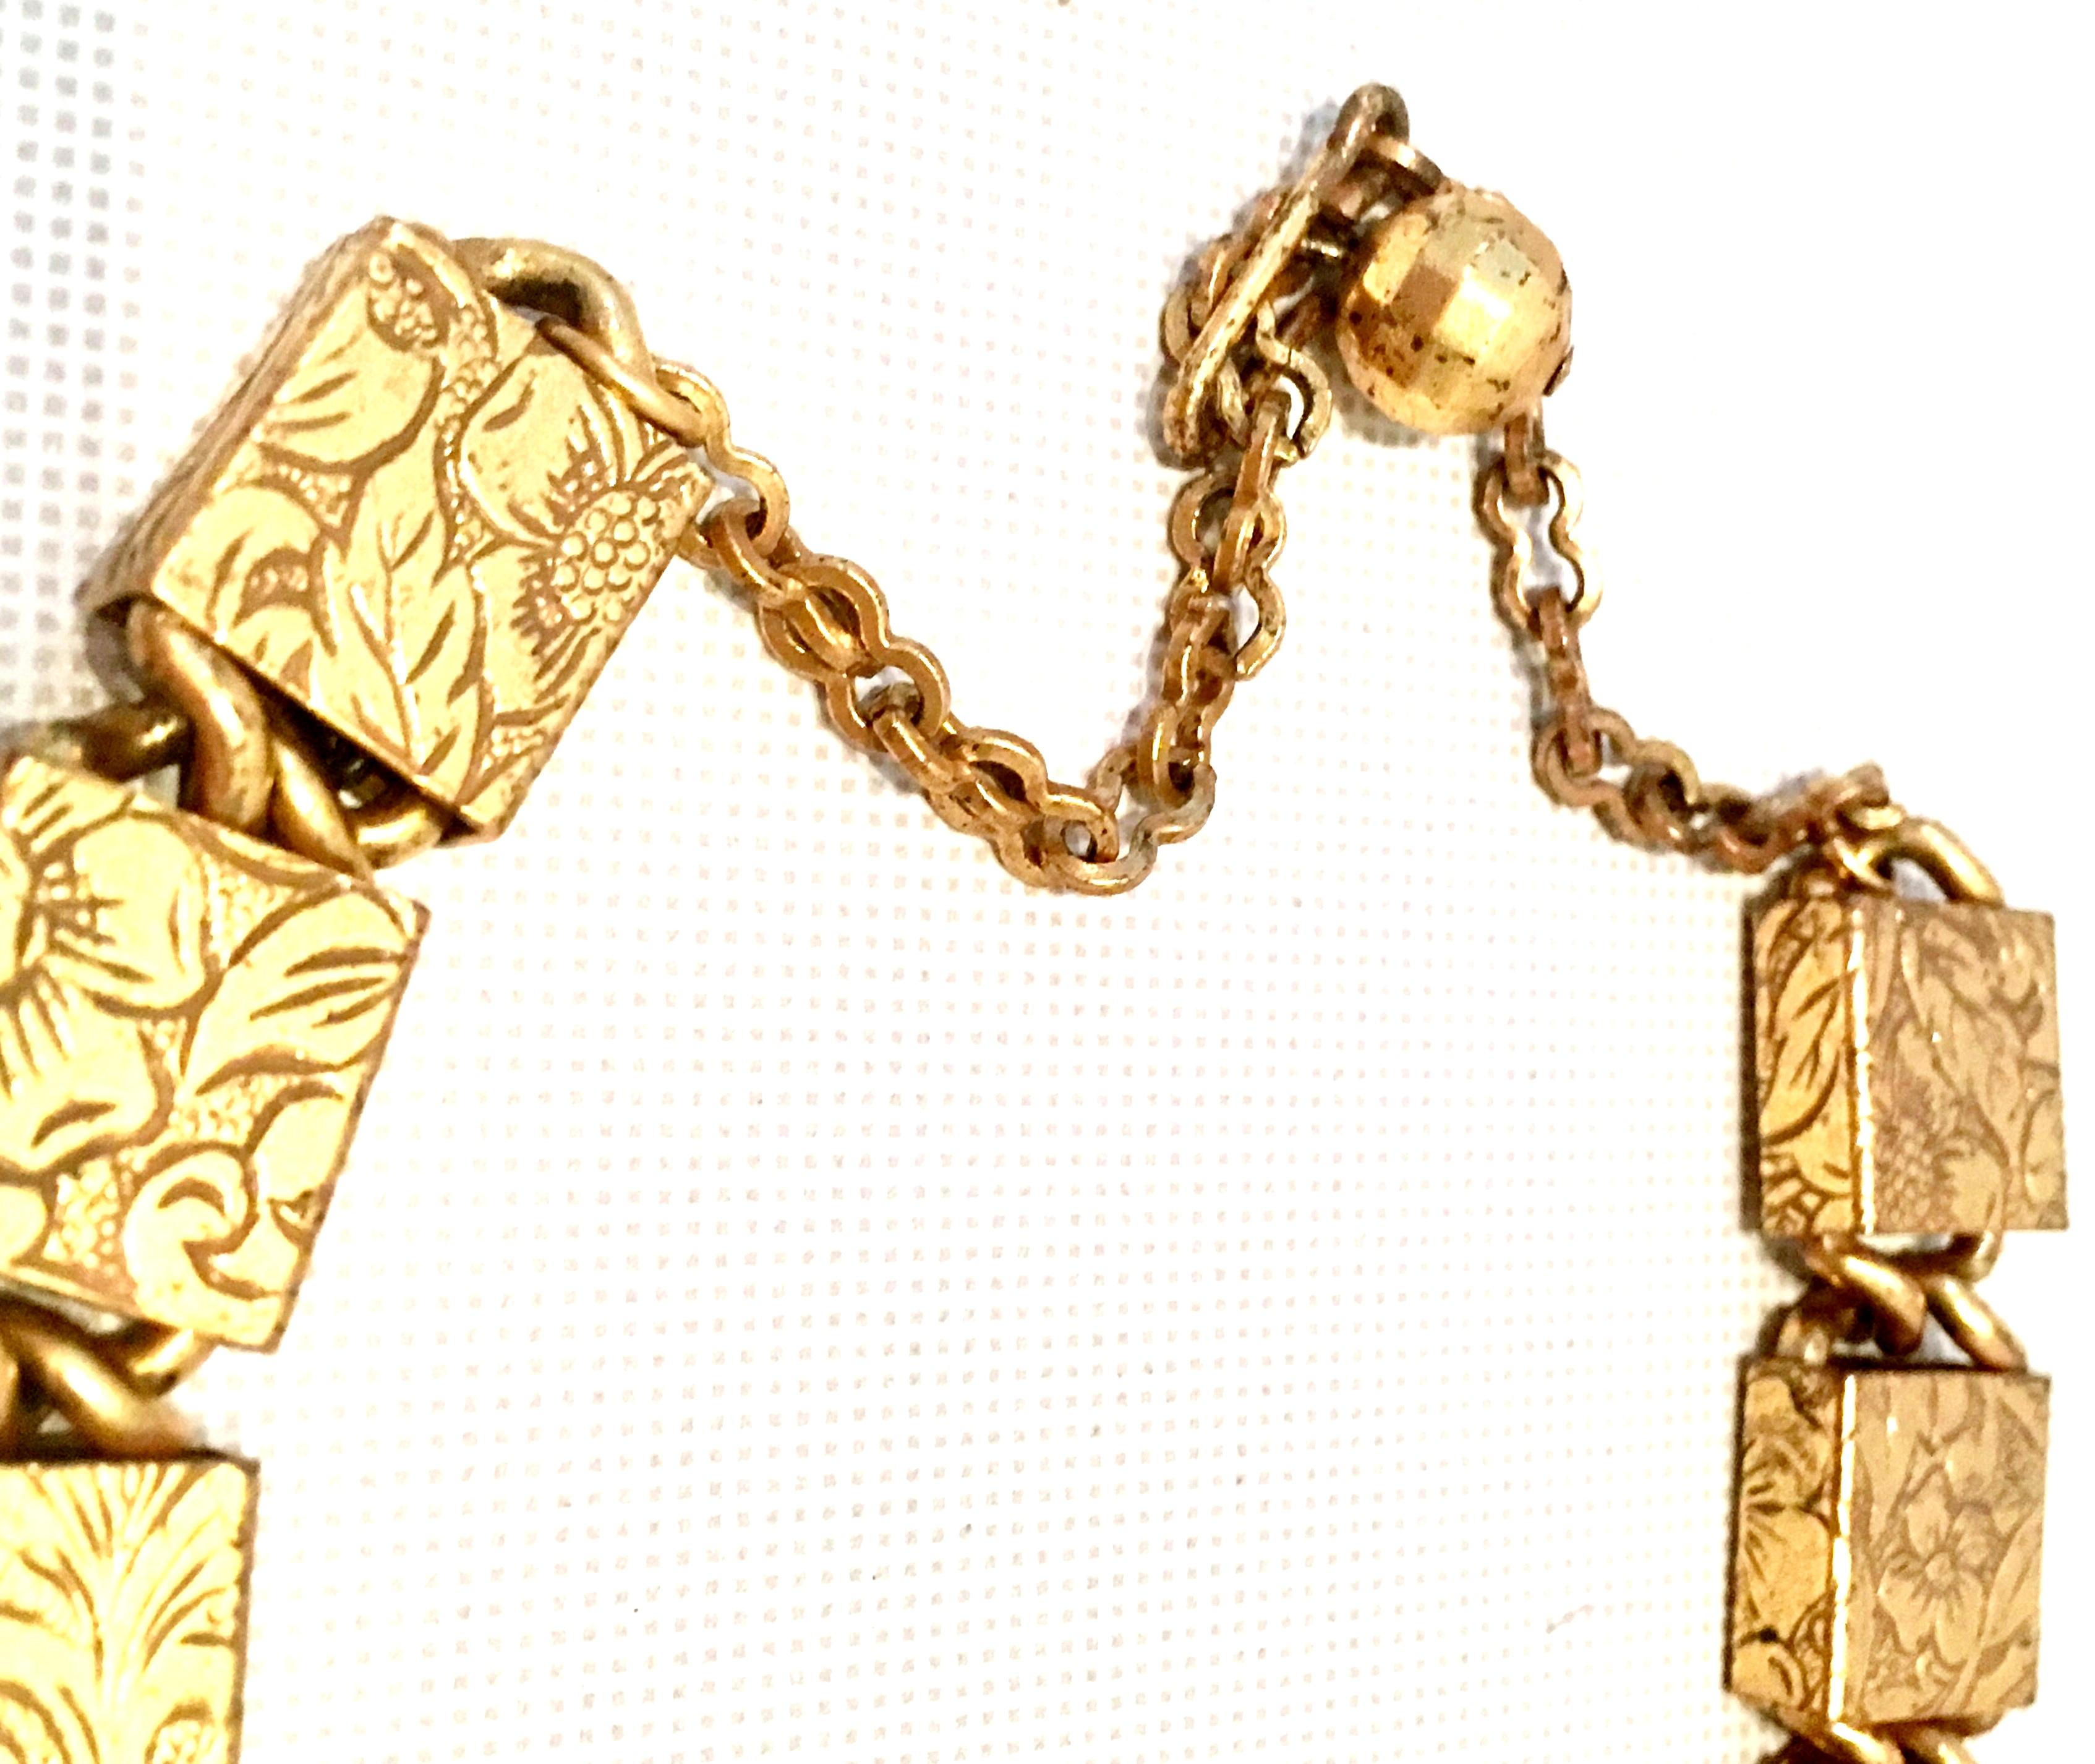 20th Century Art Nouveau Gold Book Chain Choker Style Necklace & Earrings S/3 For Sale 2